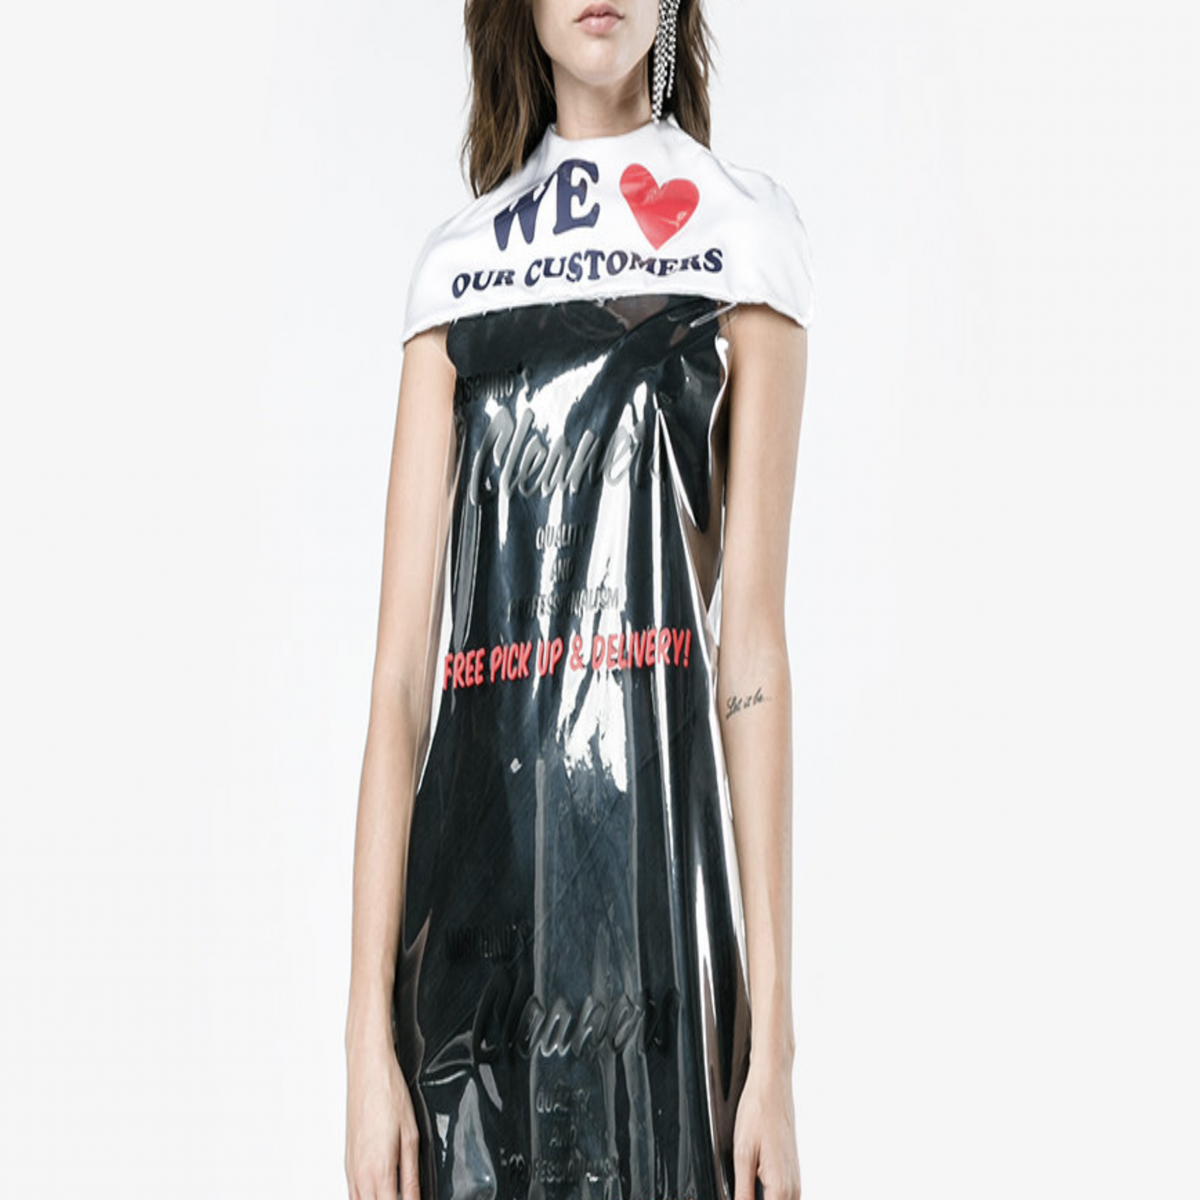 Moschino is selling a dry cleaning bag as a dress for $737 and